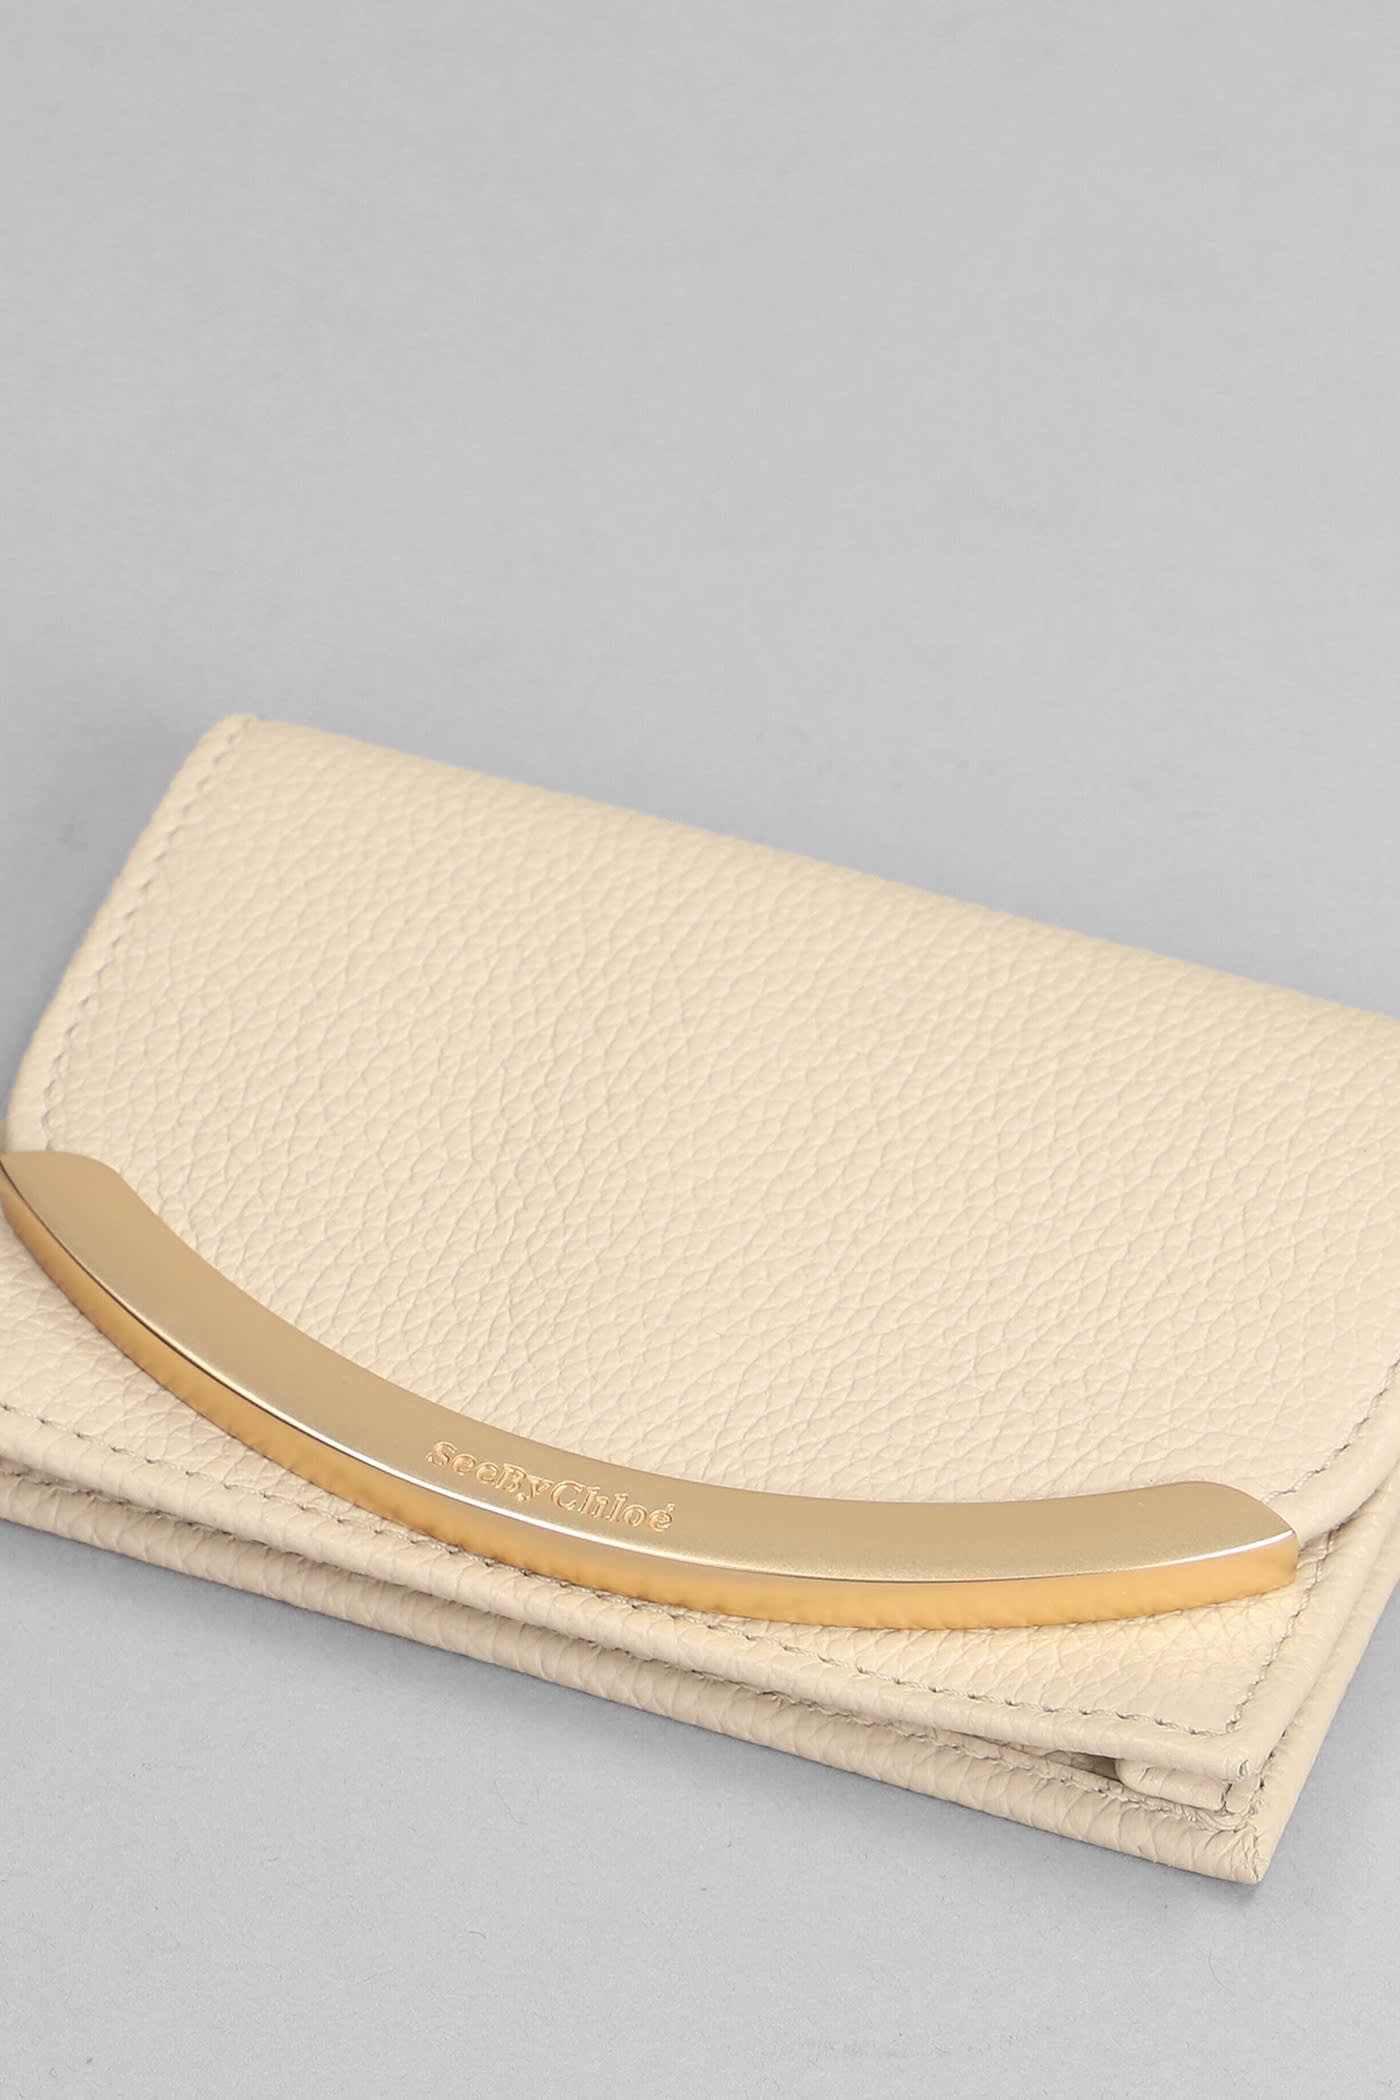 Shop See By Chloé Lizzie Wallet In Beige Leather